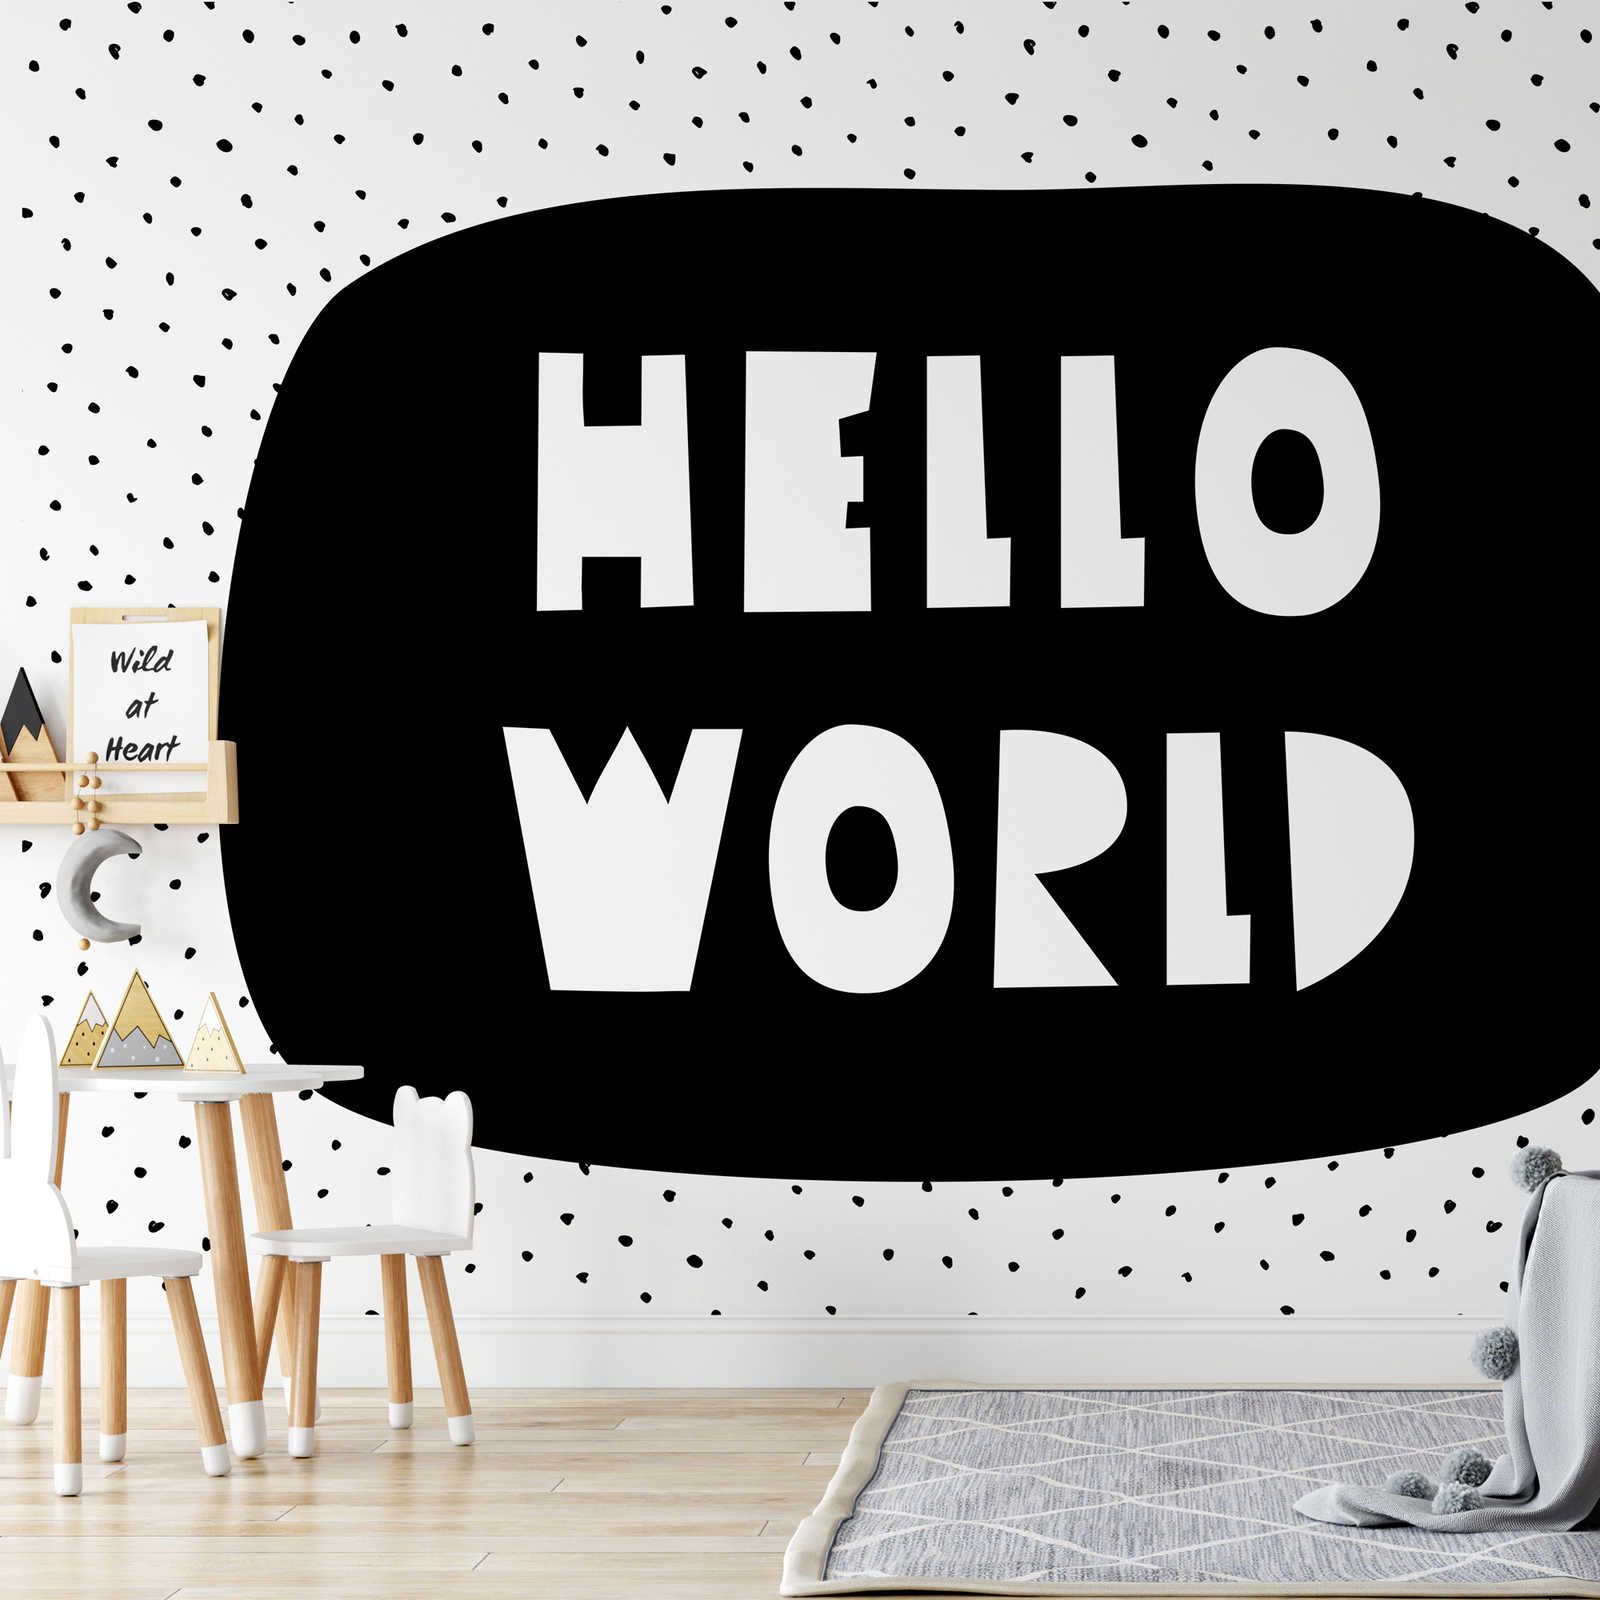 Photo wallpaper for children's room with "Hello World" lettering - textured non-woven
